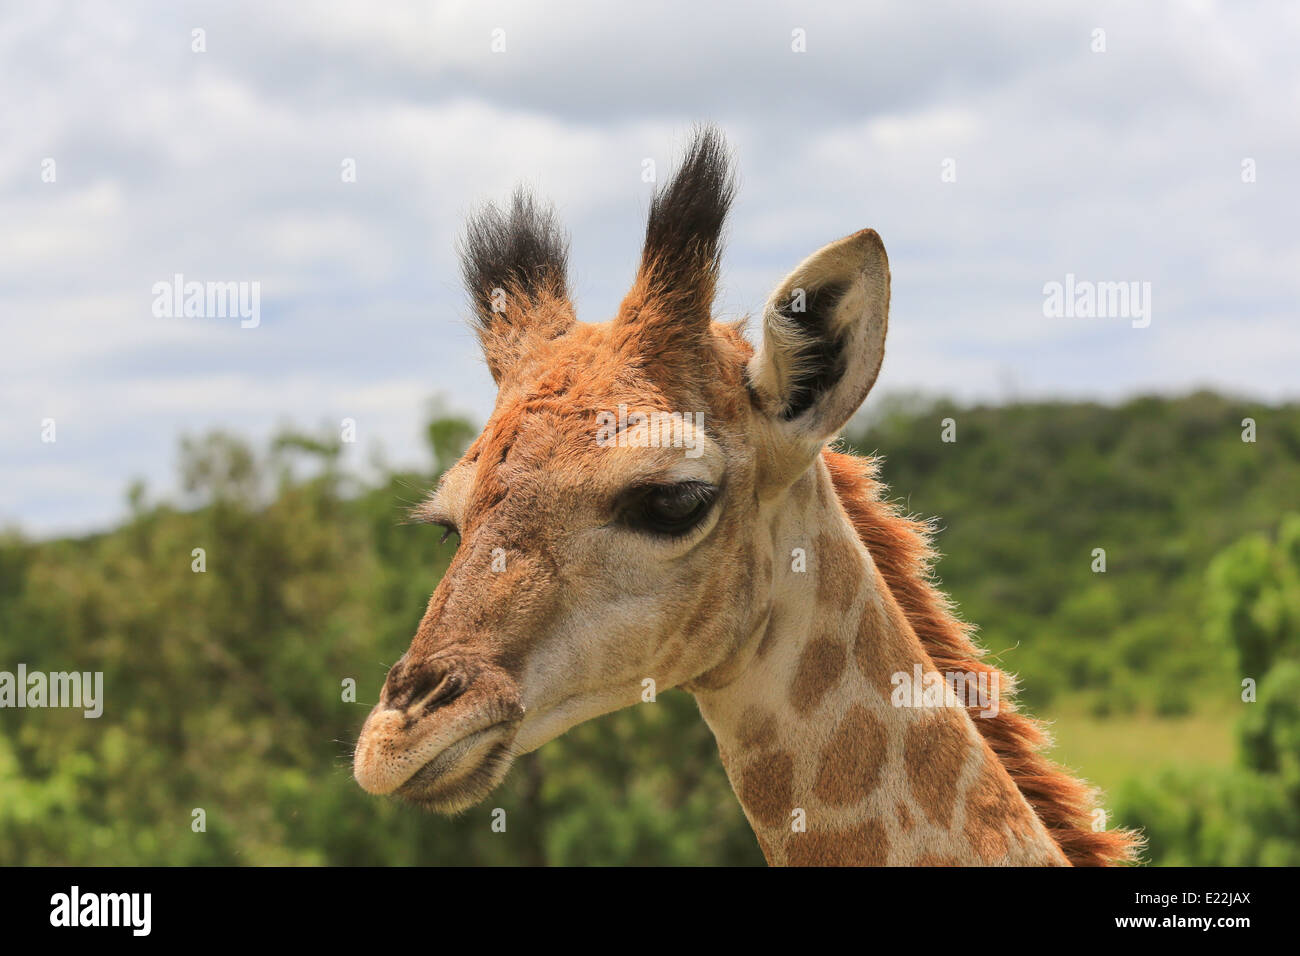 Giraffe close-up on the Mpongo Private Game Reserve, 25 km northwest of East London, South Africa. Stock Photo